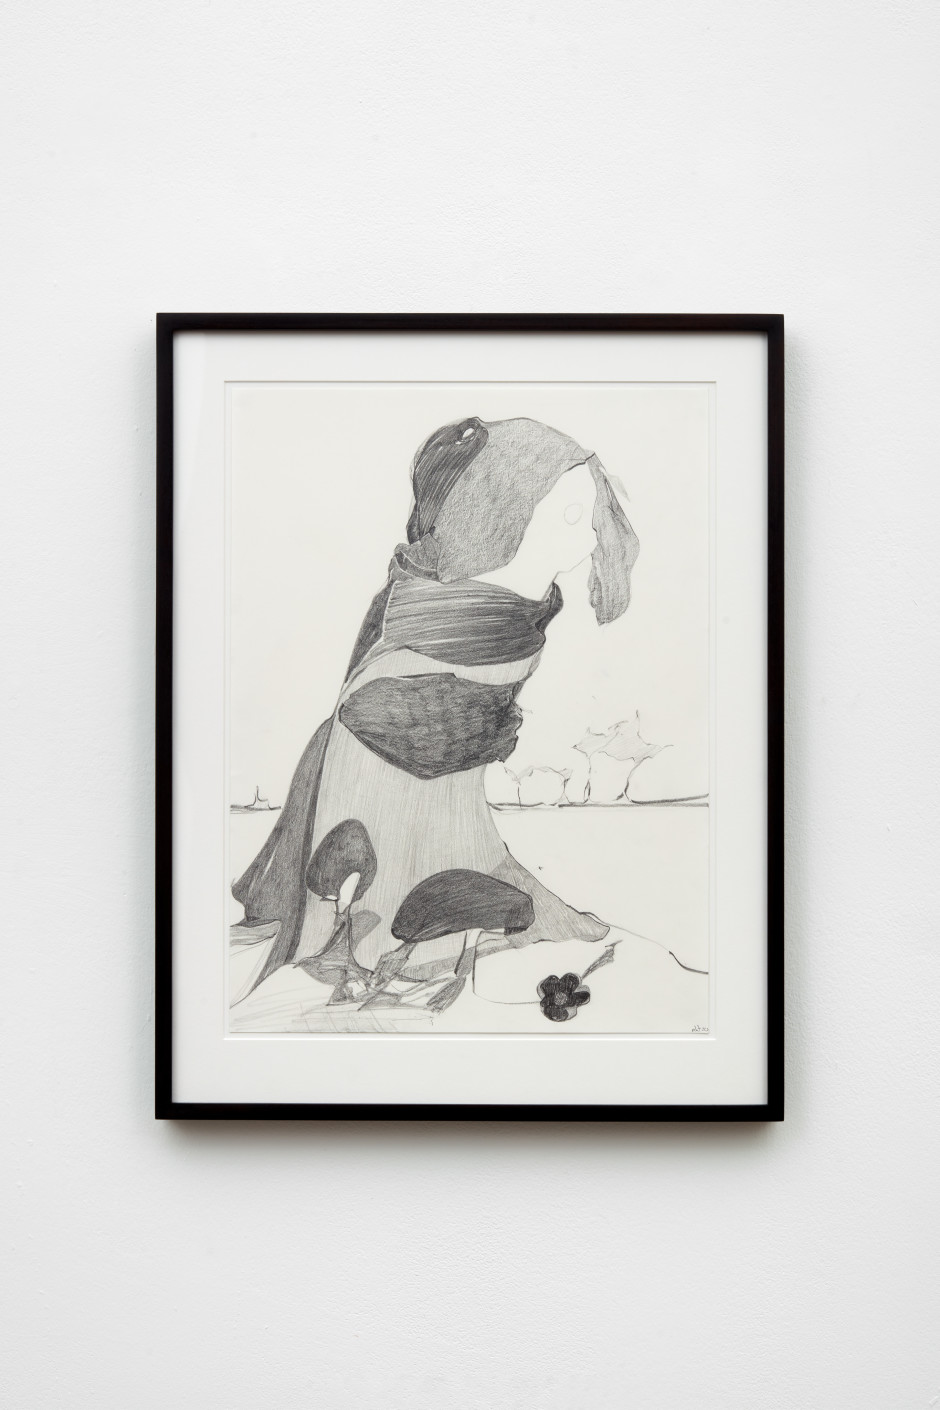 Piggy-backing, 2020  graphite on paper  site size: 50.8 x 37.5 cm / 20 x 14 ¾ in frame size: 63.5 x 49 x 3.8 cm / 25 x 19 ¼ x 1 ½ in